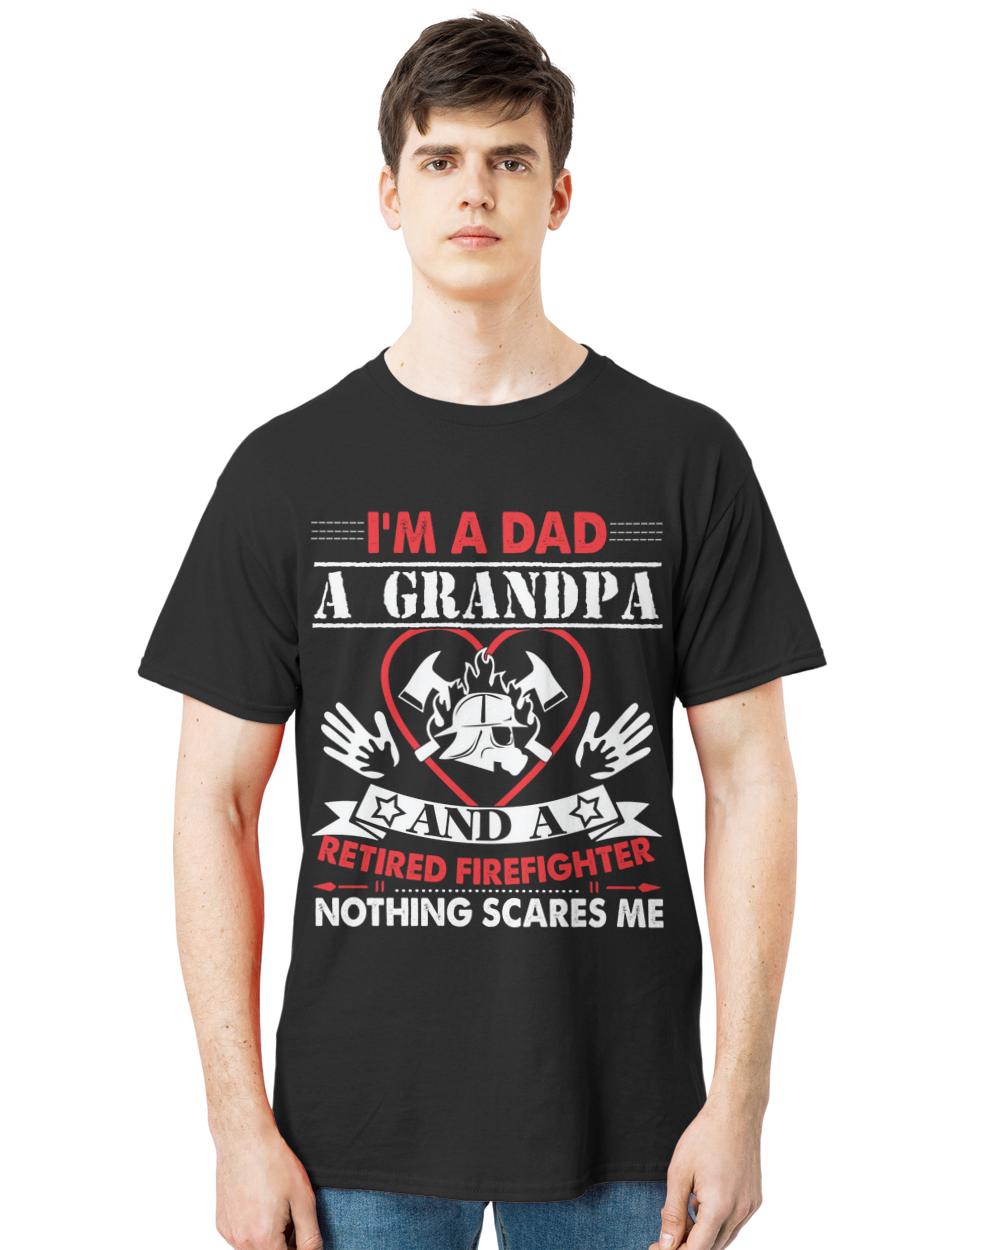 im a dad a grandpa and a retired firefighter gift t-shirt